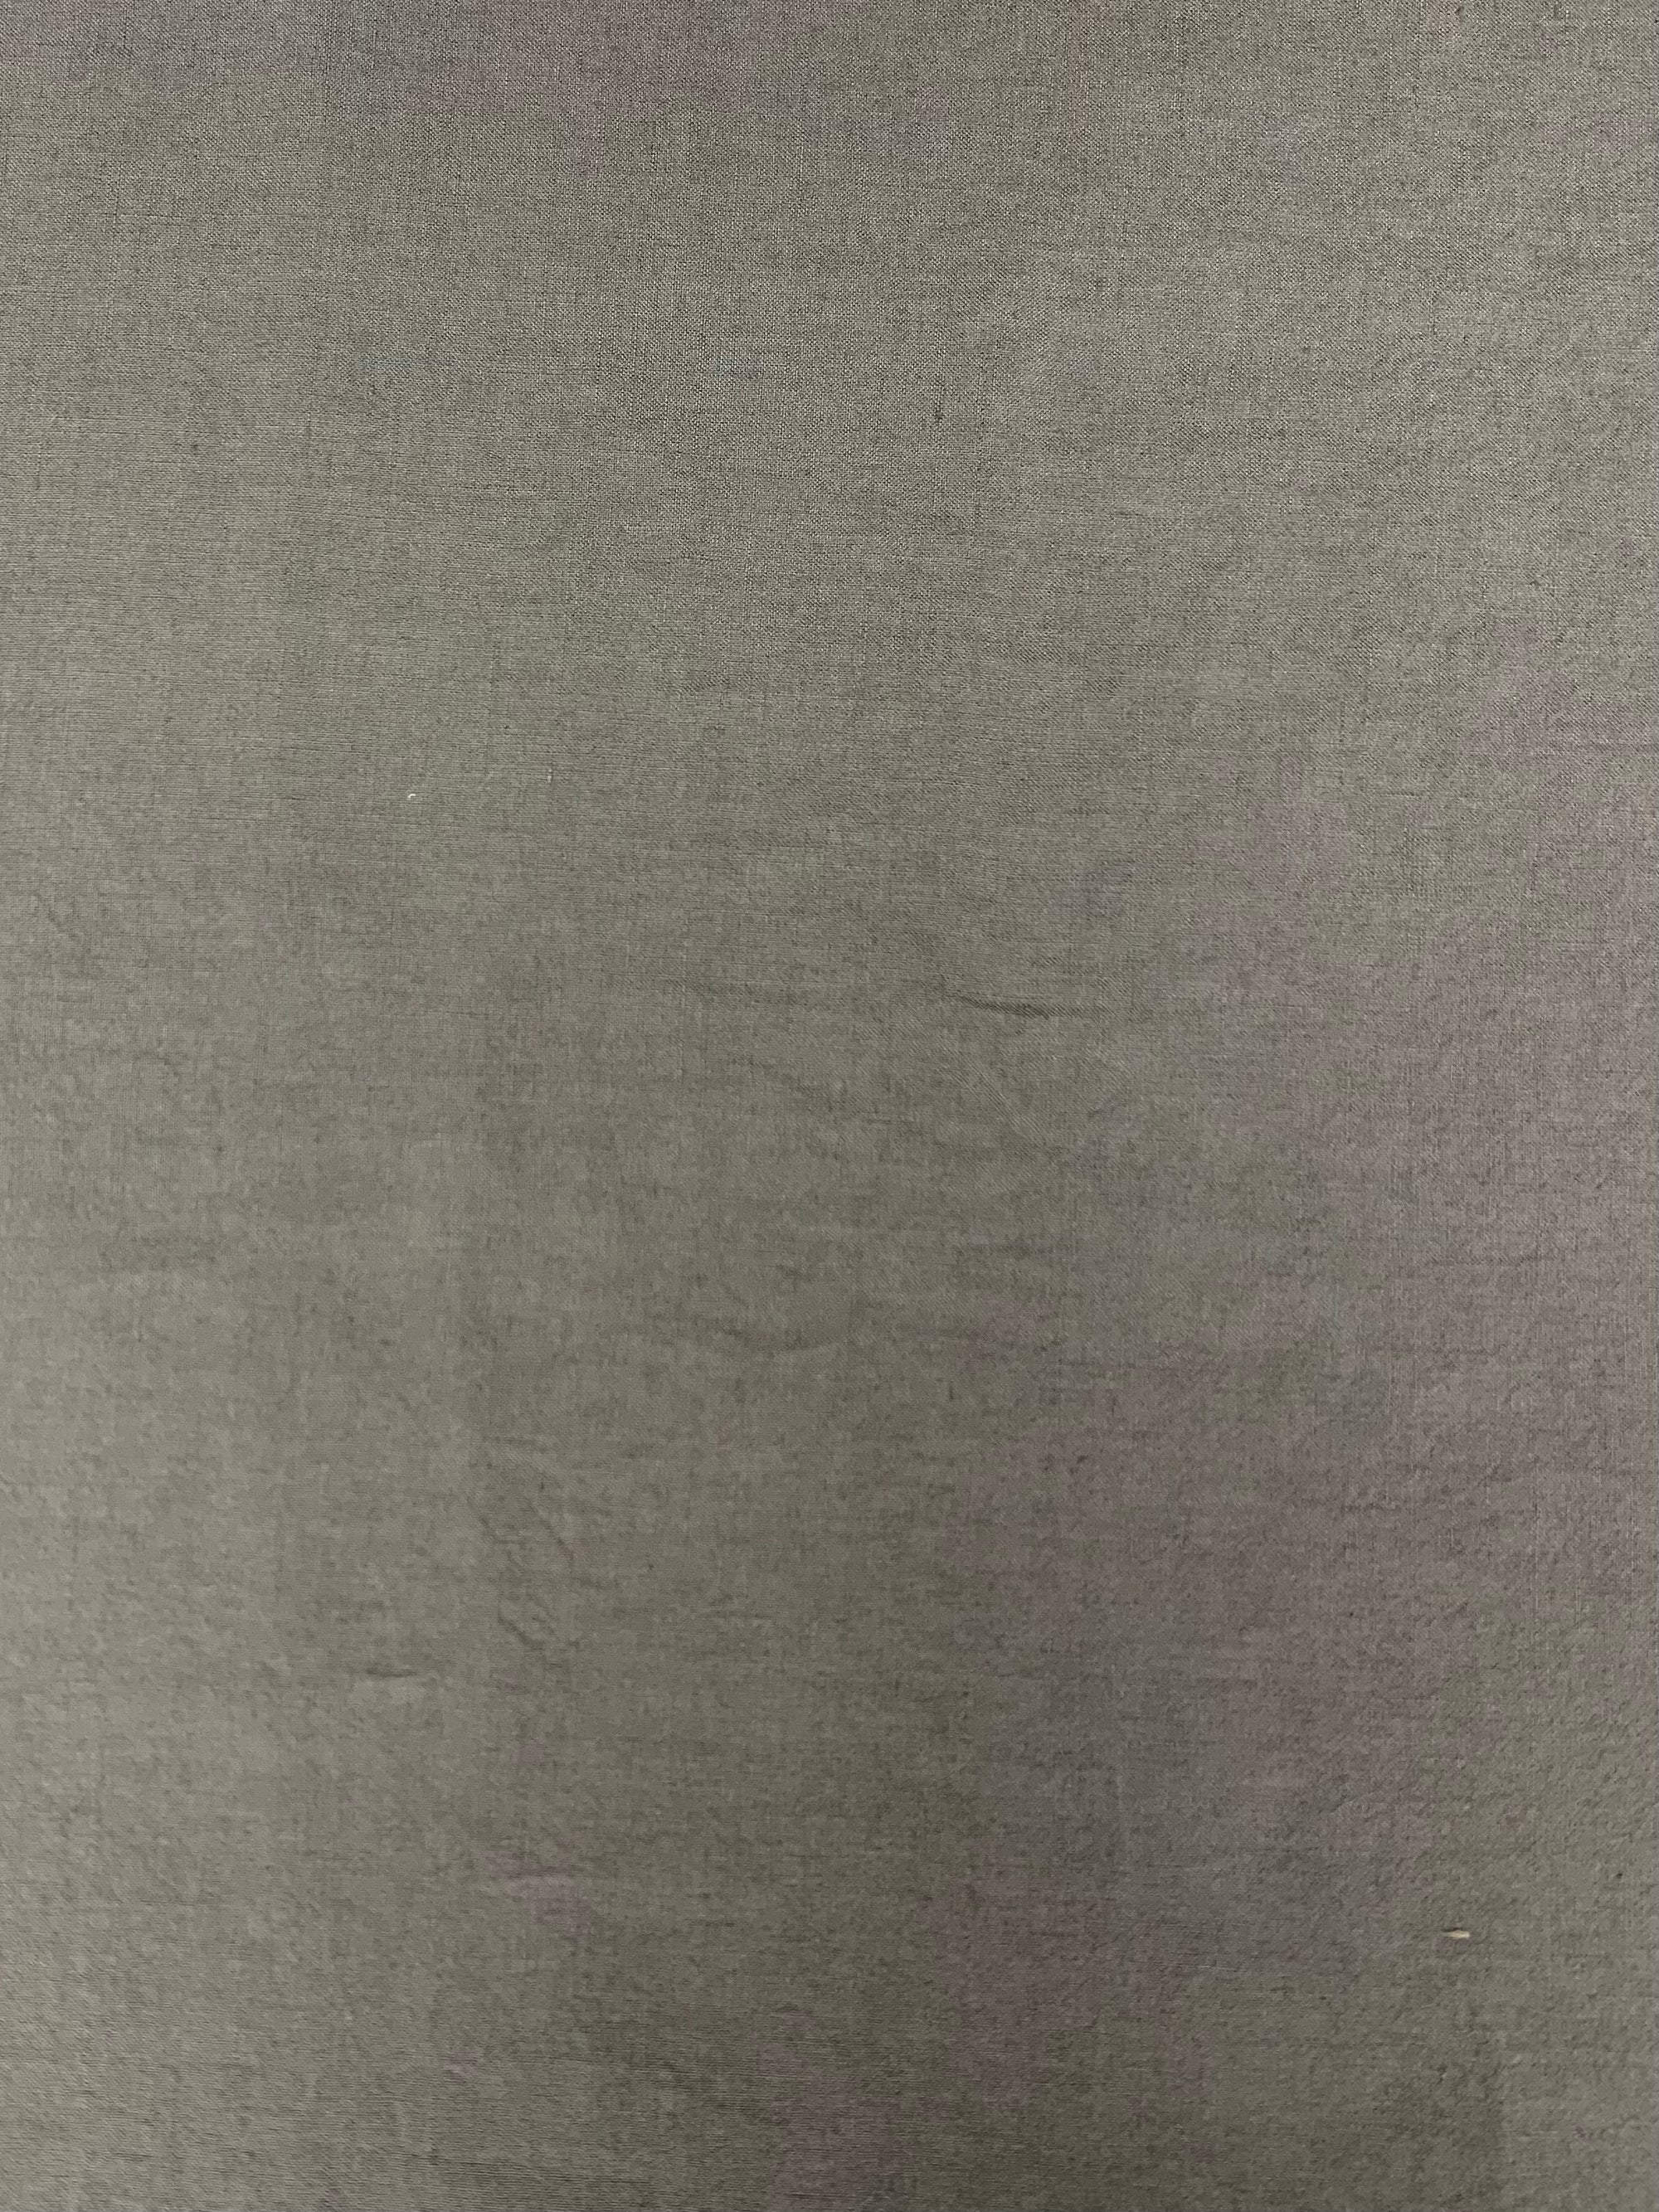  mediumweight linen fabric is a opaque warm gray stone color